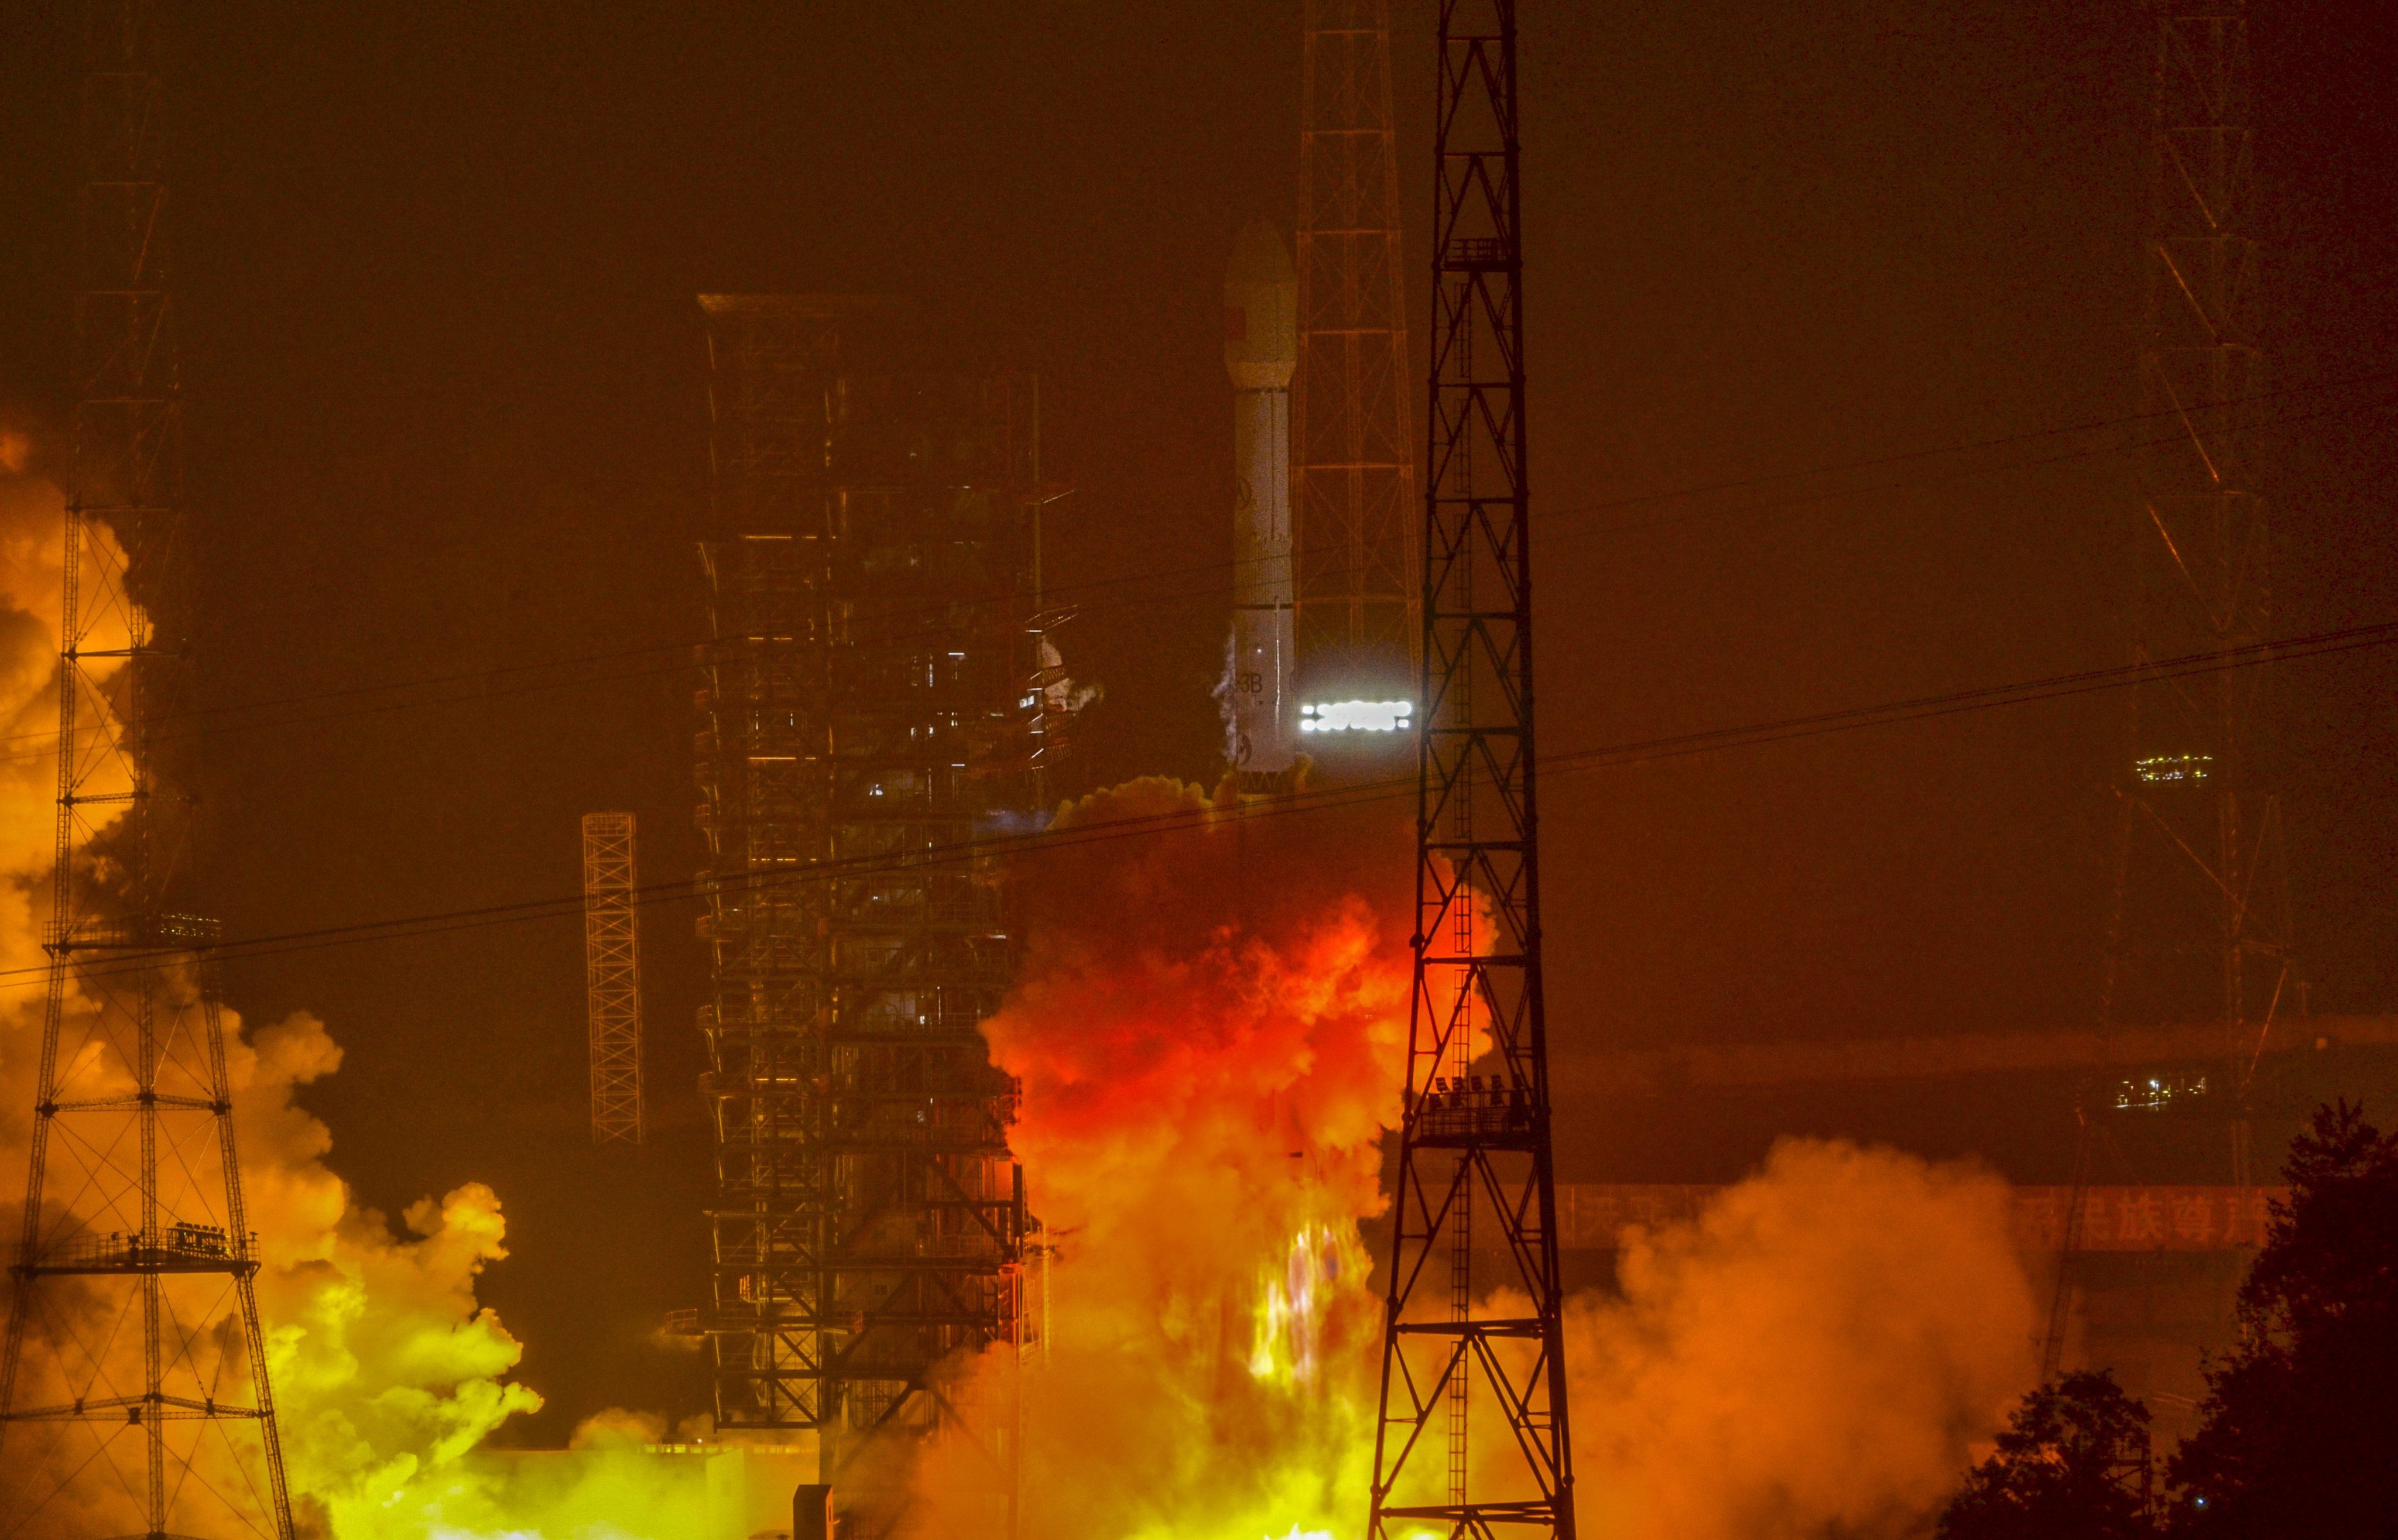 China’s Ludi Tance 4-01 satellite lifts off from the Xichang launch centre on board a Long March 3B rocket. Photo: CASC